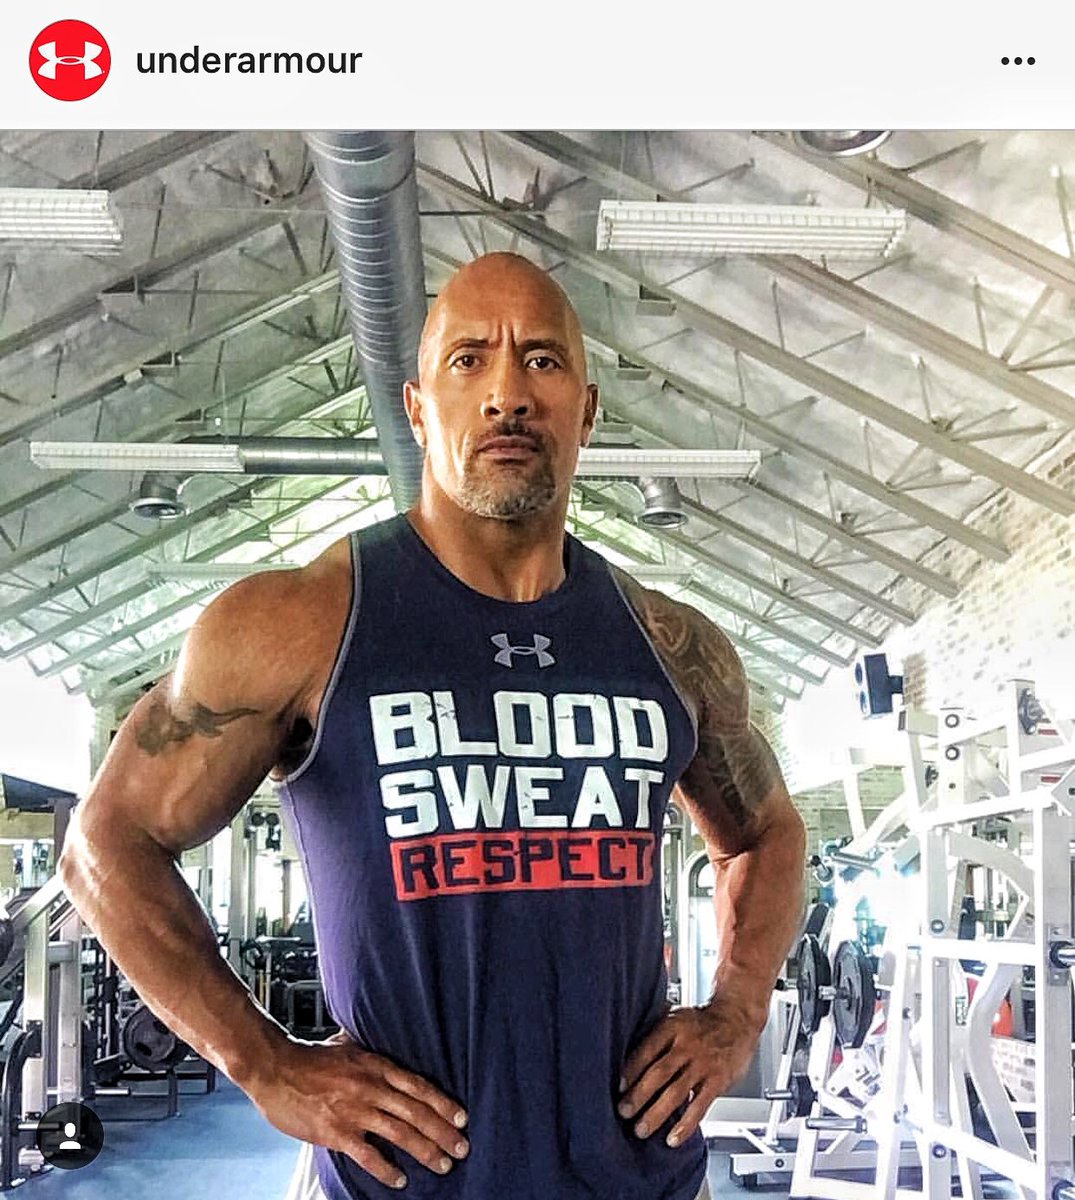 Thank U for making our #ProjectRock shirts, @UnderArmour's #1 seller. #BloodSweatRespect????????????
https://t.co/vYtBQVsMjX https://t.co/Al7dRHdtx6